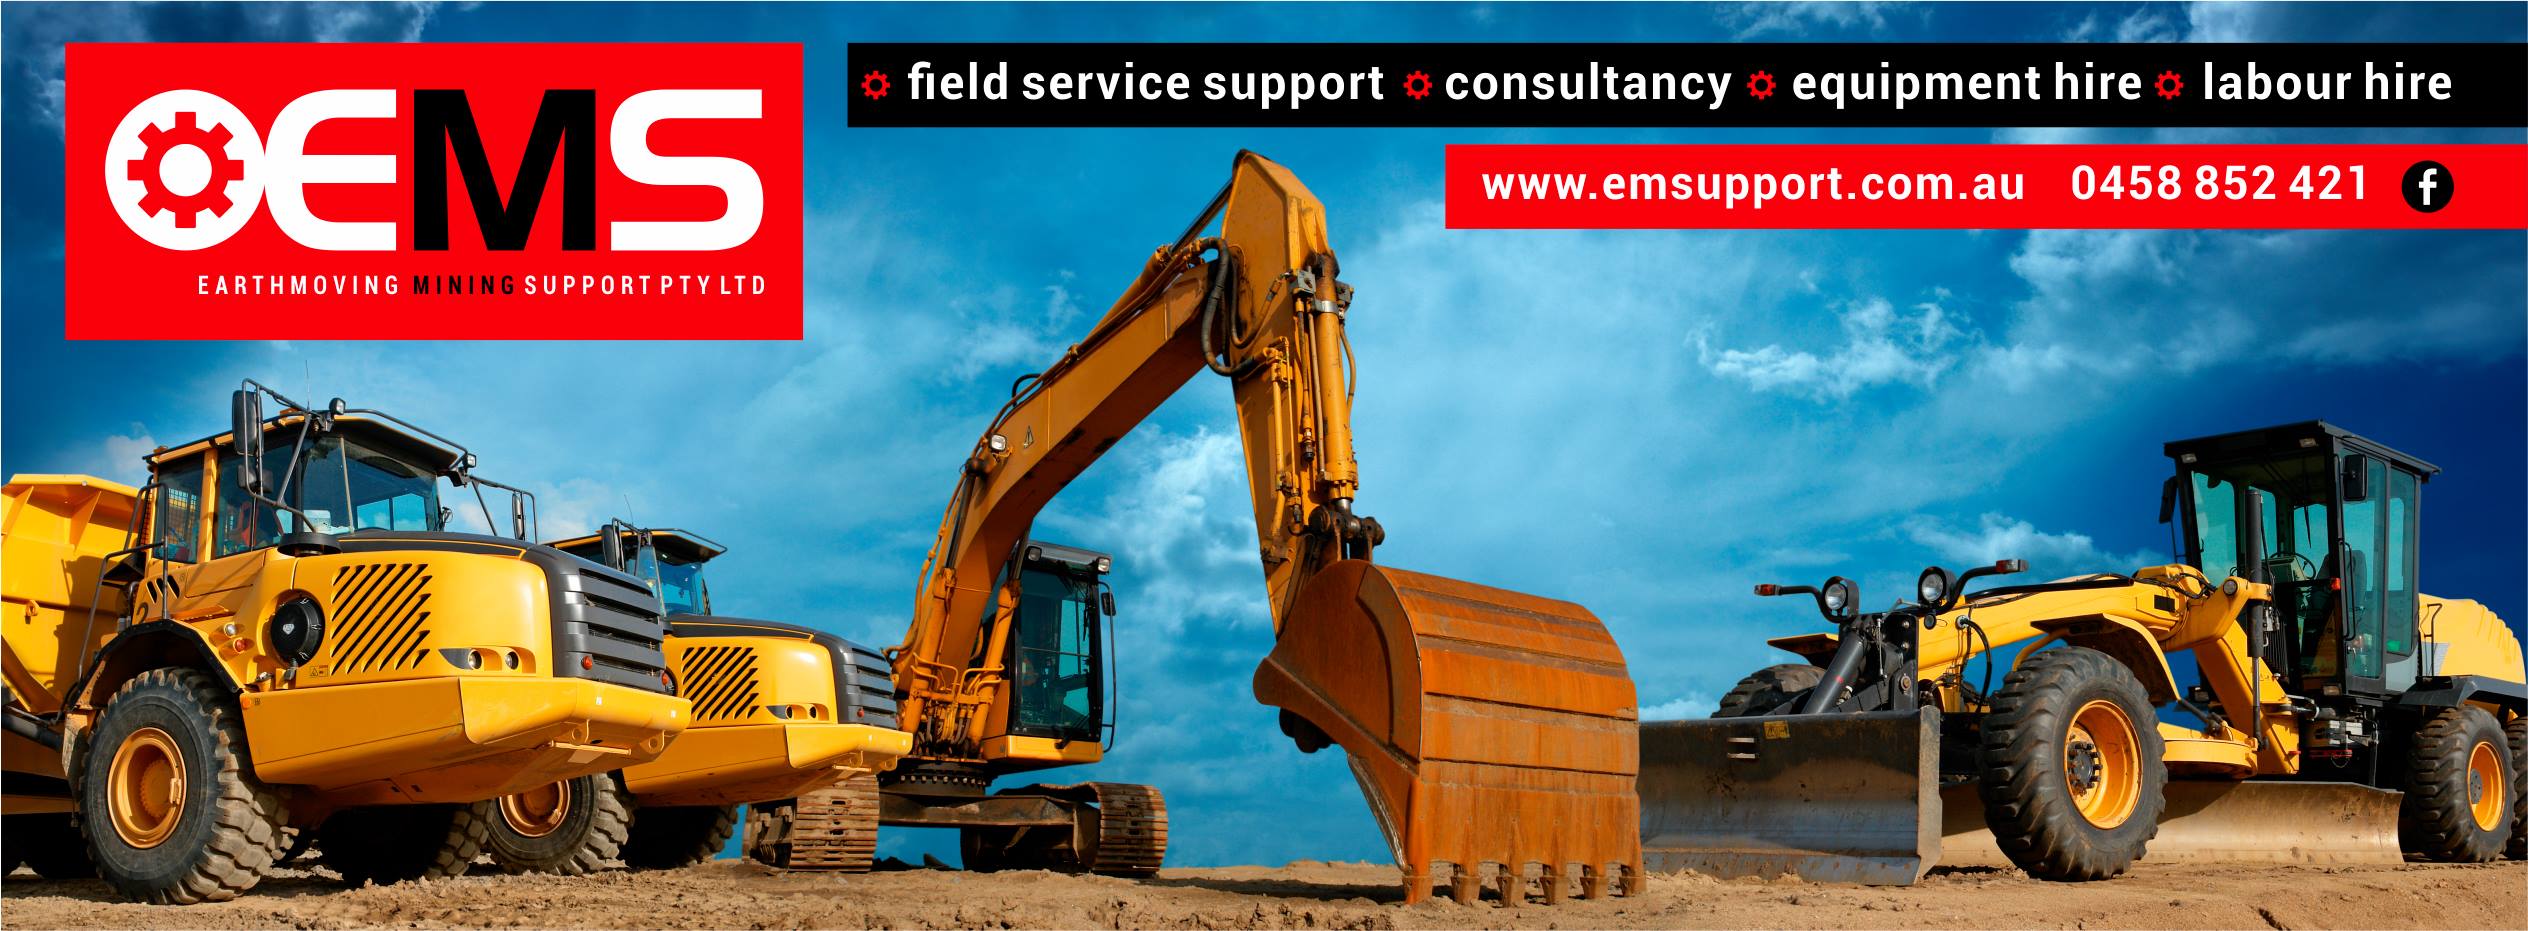 Earthmoving Mining Support, Earthmoving, mining, construction, road transport equipment, field service support, consultancy, equipment hire, labour hire, heavy equipment repair business mines, hydraulic torque wrenches, rad guns, jacking, pushing equipment, electronic diagnostic equipment, custom jobs, repairs, rebuilds, Queensland 